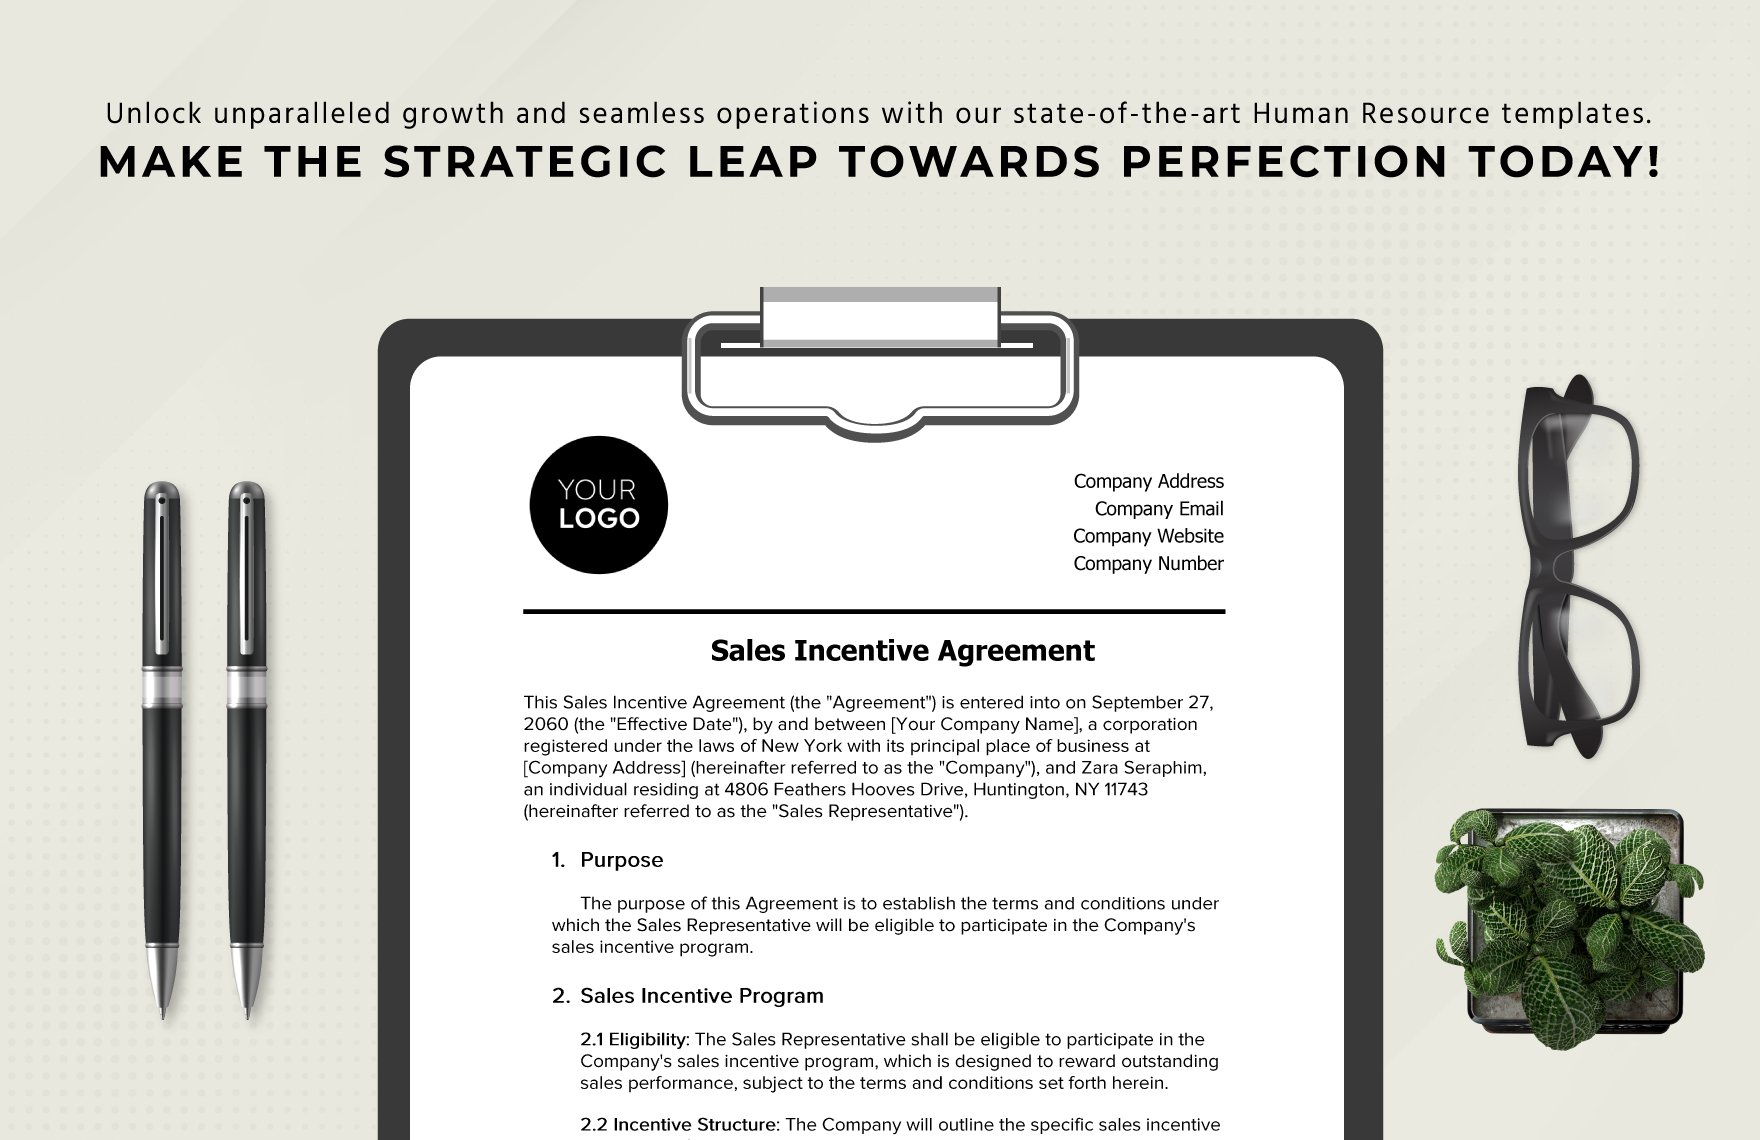 Sales Incentive Agreement HR Template